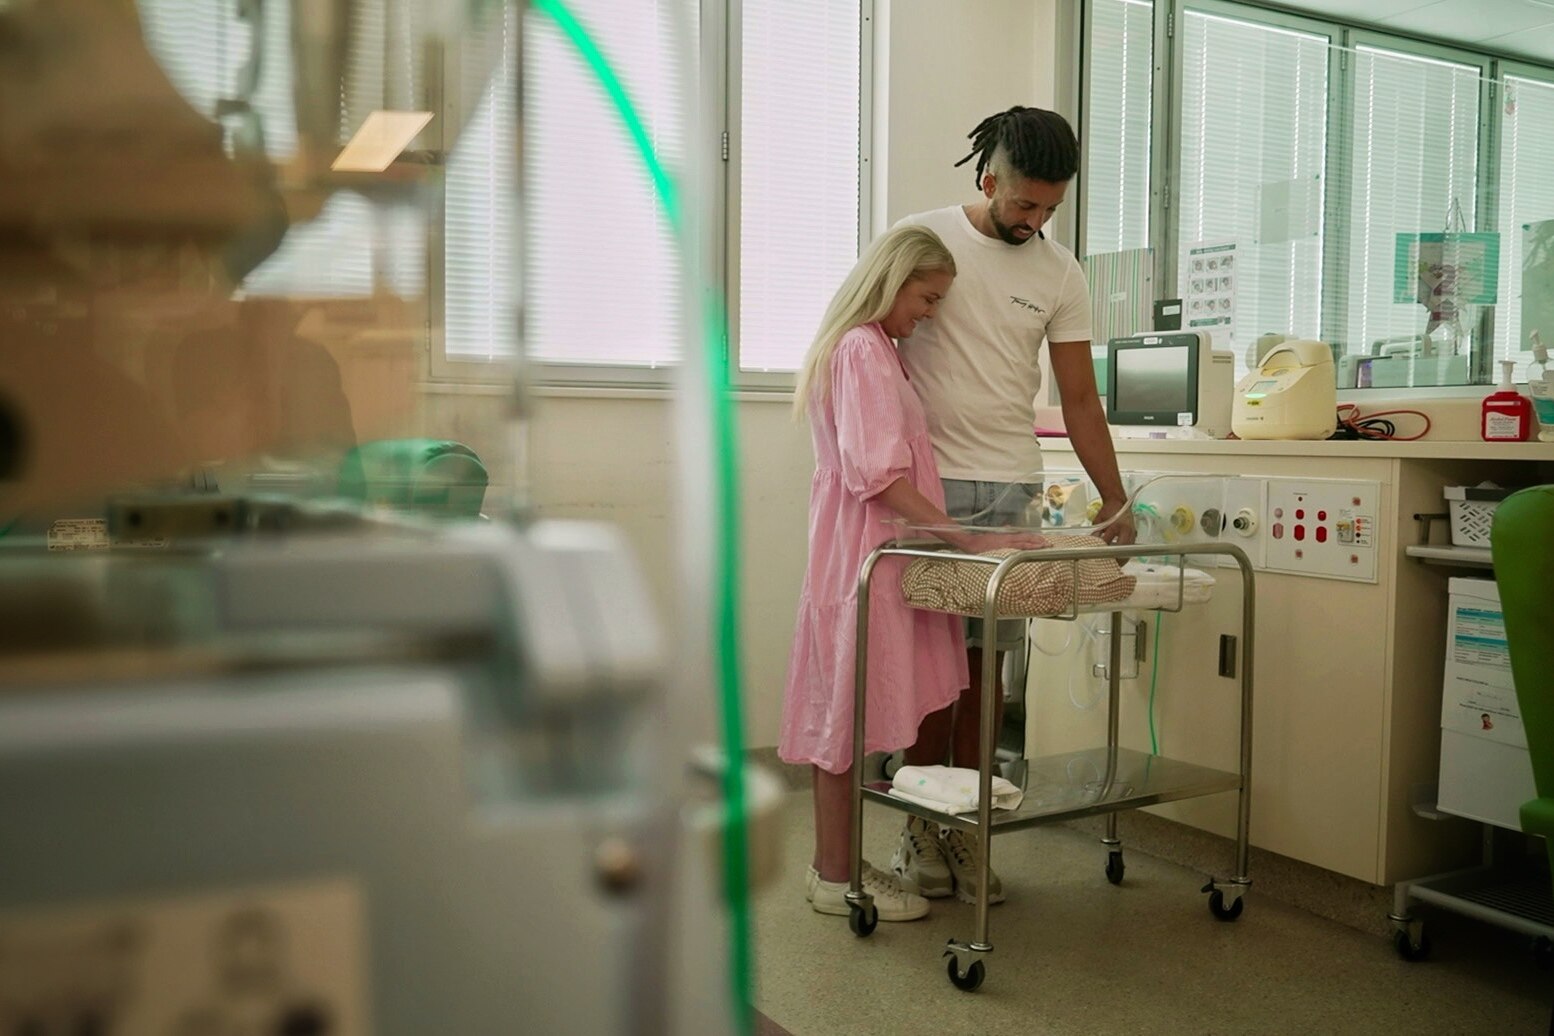 A man and a woman in hospital looking down at their baby boy.